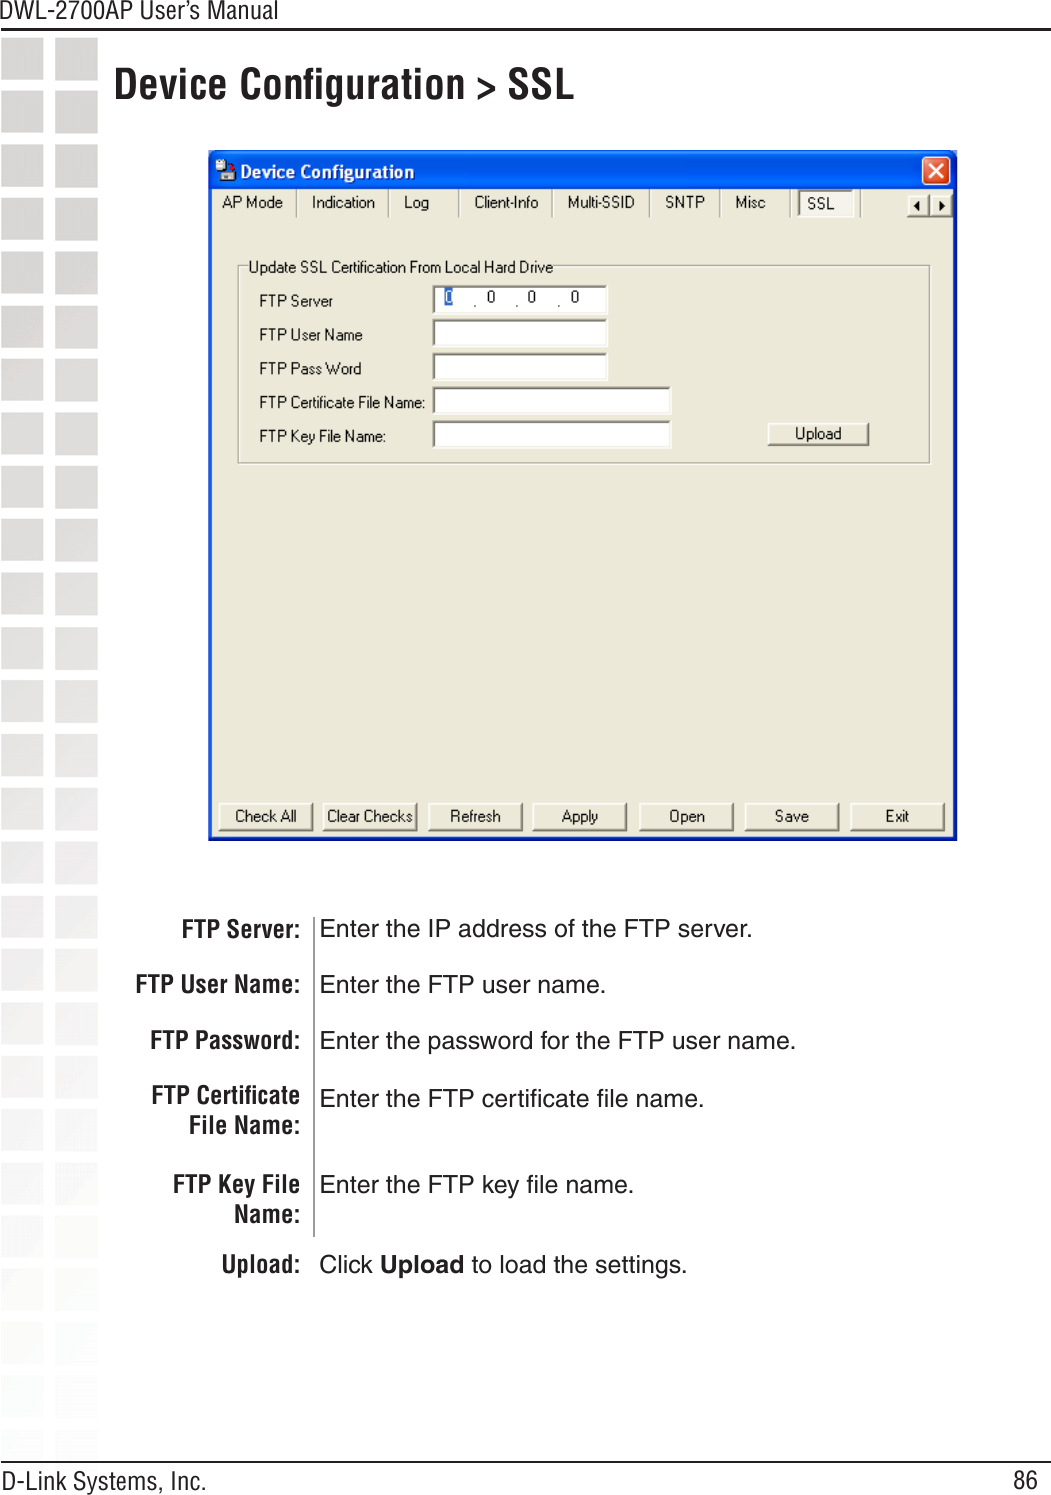 86DWL-2700AP User’s Manual D-Link Systems, Inc.FTP Server: Enter the IP address of the FTP server.Device Conﬁguration &gt; SSLFTP User Name:FTP Password:FTP Certiﬁcate File Name:FTP Key File Name:Upload:Enter the FTP user name.Enter the password for the FTP user name.Enter the FTP certiﬁcate ﬁle name.Enter the FTP key ﬁle name.Click Upload to load the settings.